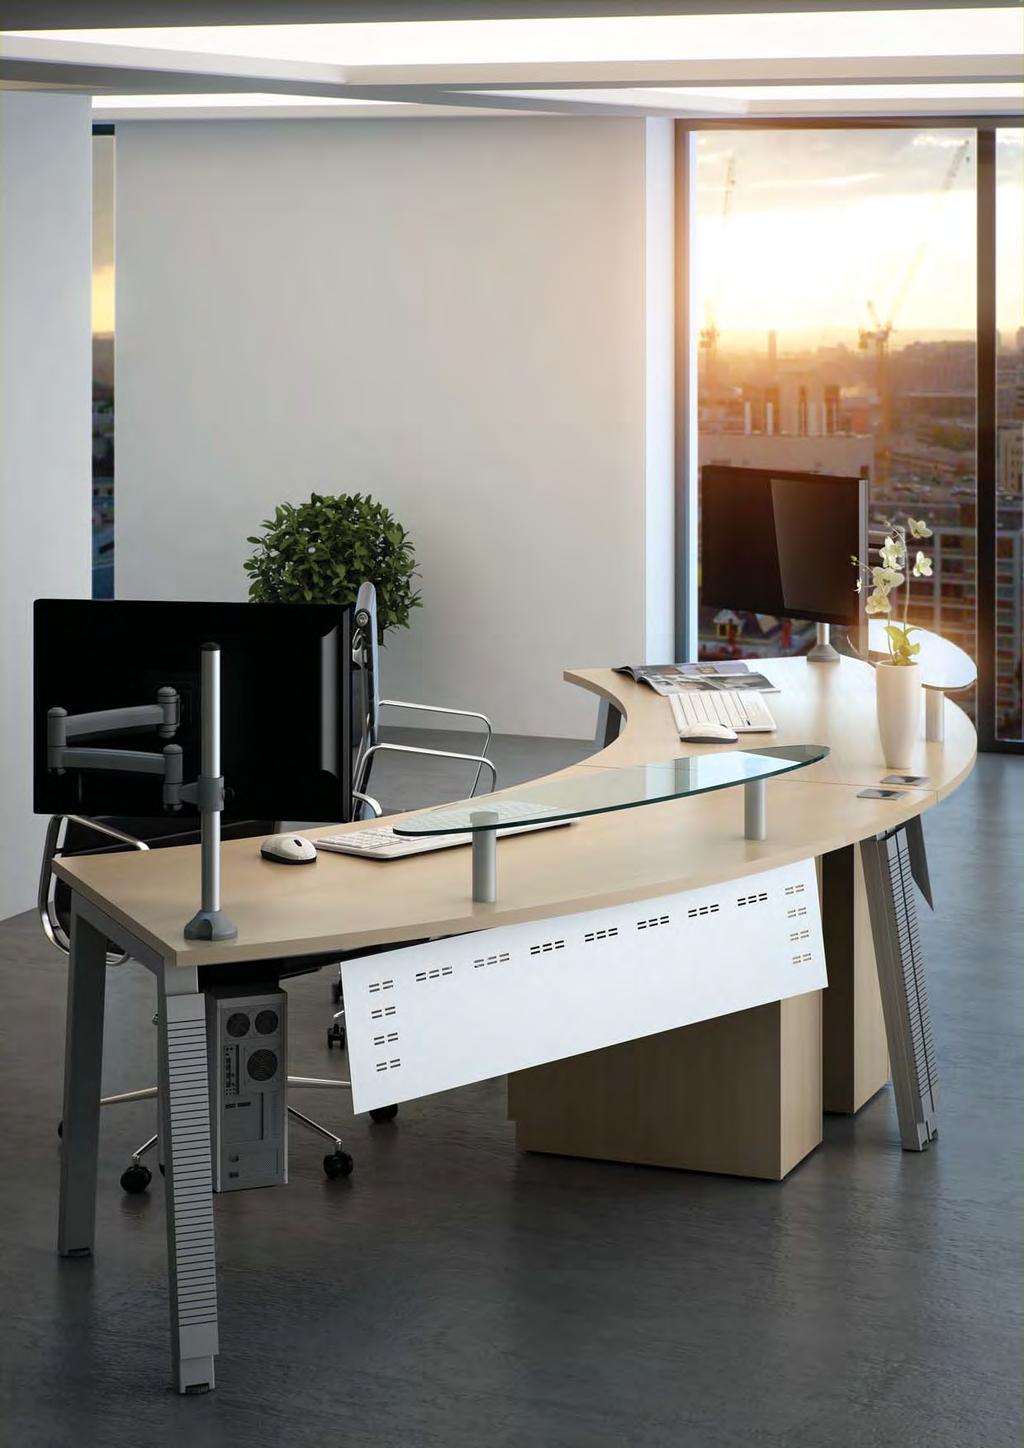 Radius Reception Desking This twin reception layout provides an elegant approach for customers and visitors.